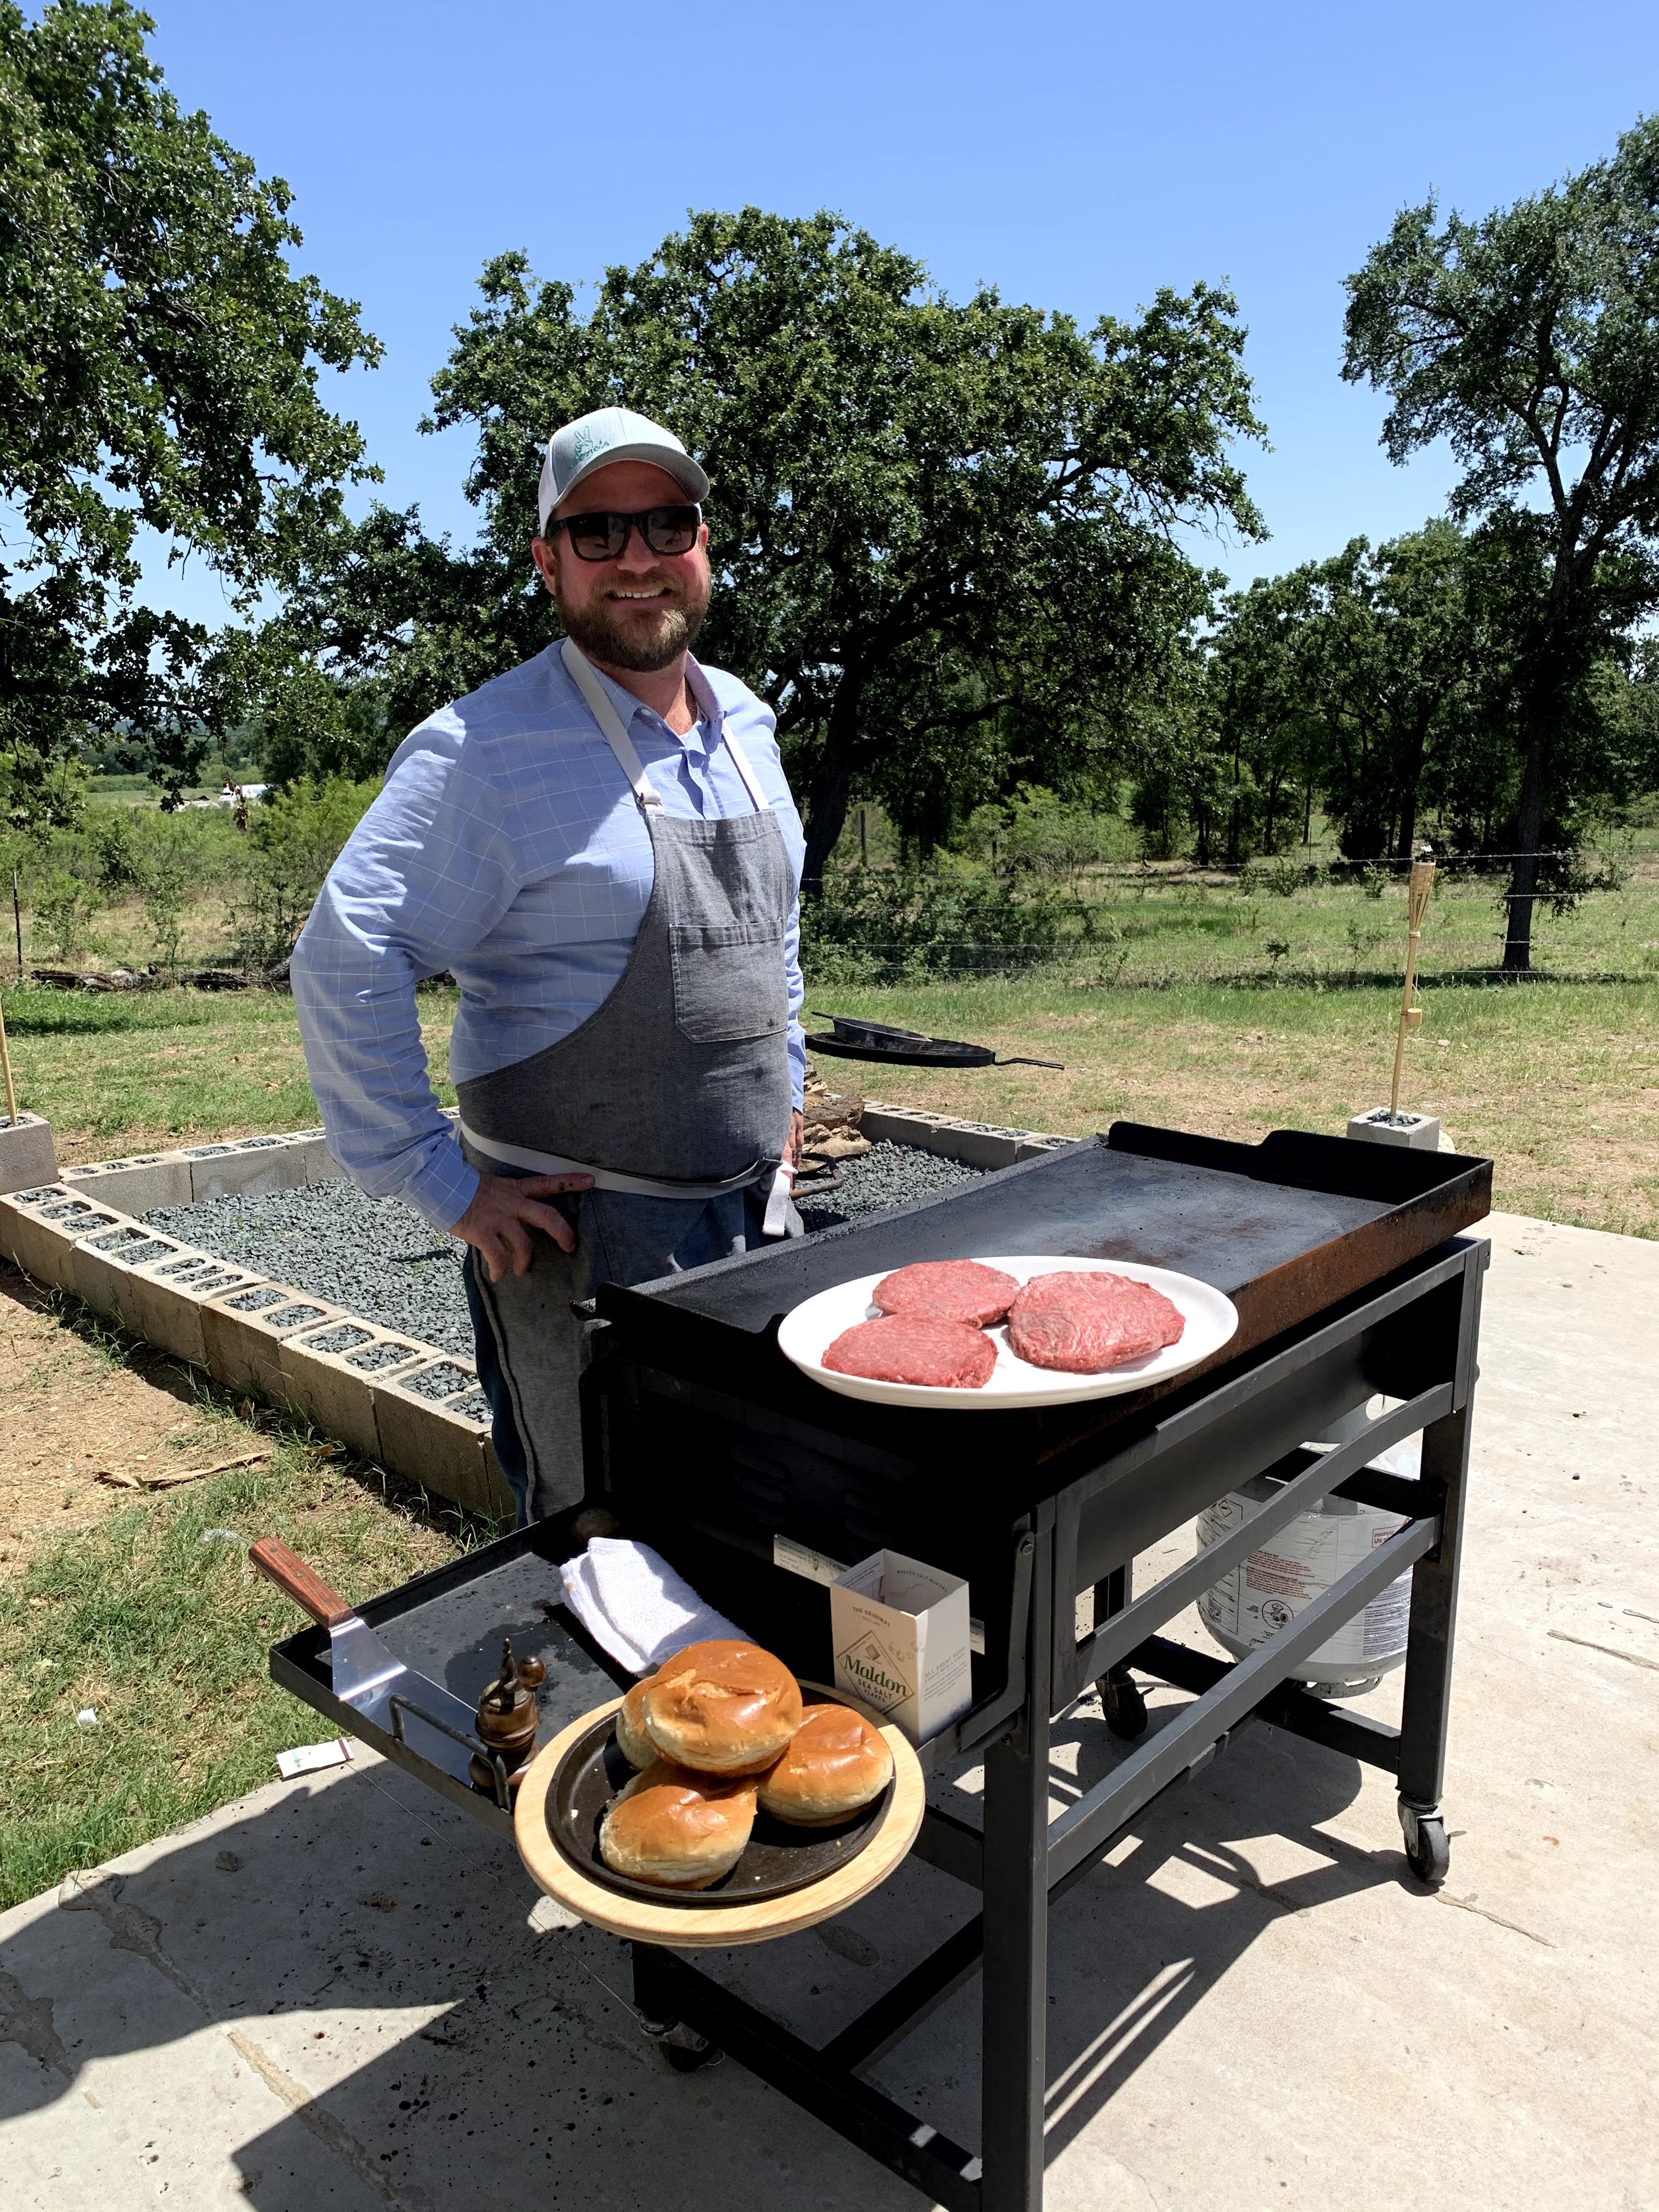 Chef Drew Curren of 24 Diner cooking hamburgers at the grill in Austin TExas